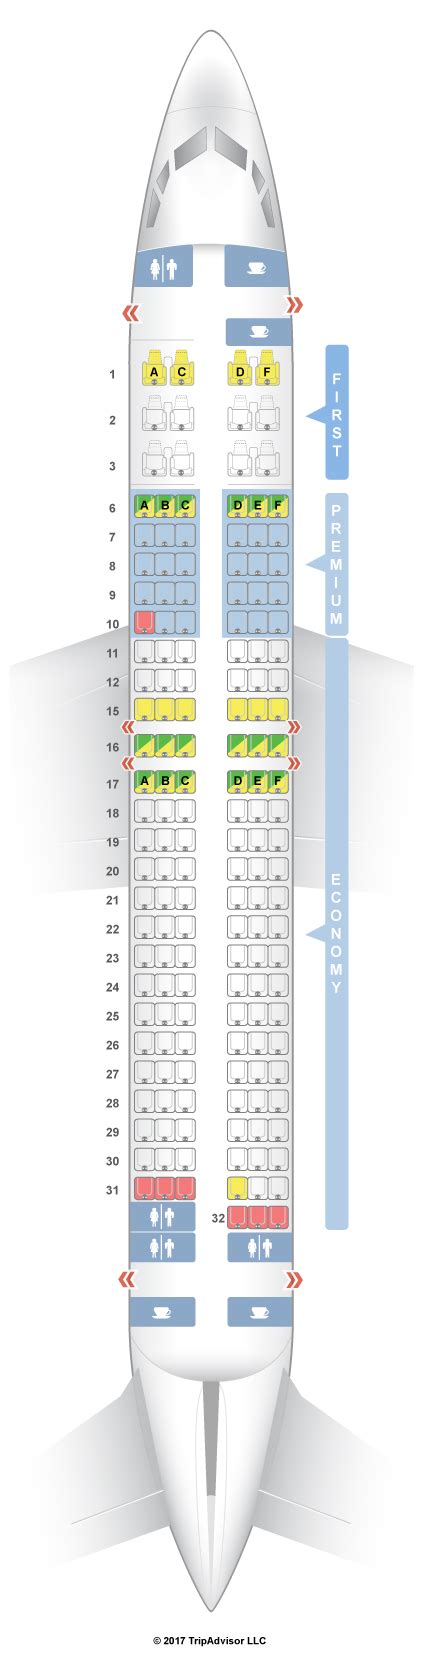 Premium Class is the name of Alaska Airlines' extra legroom economy seating, offering an average of an additional four inches of legroom compared to standard economy seating. Premium Class is typically located in the first several rows of economy, and also at exit rows. Alaska offers Premium Class throughout its mainline and regional fleet ...